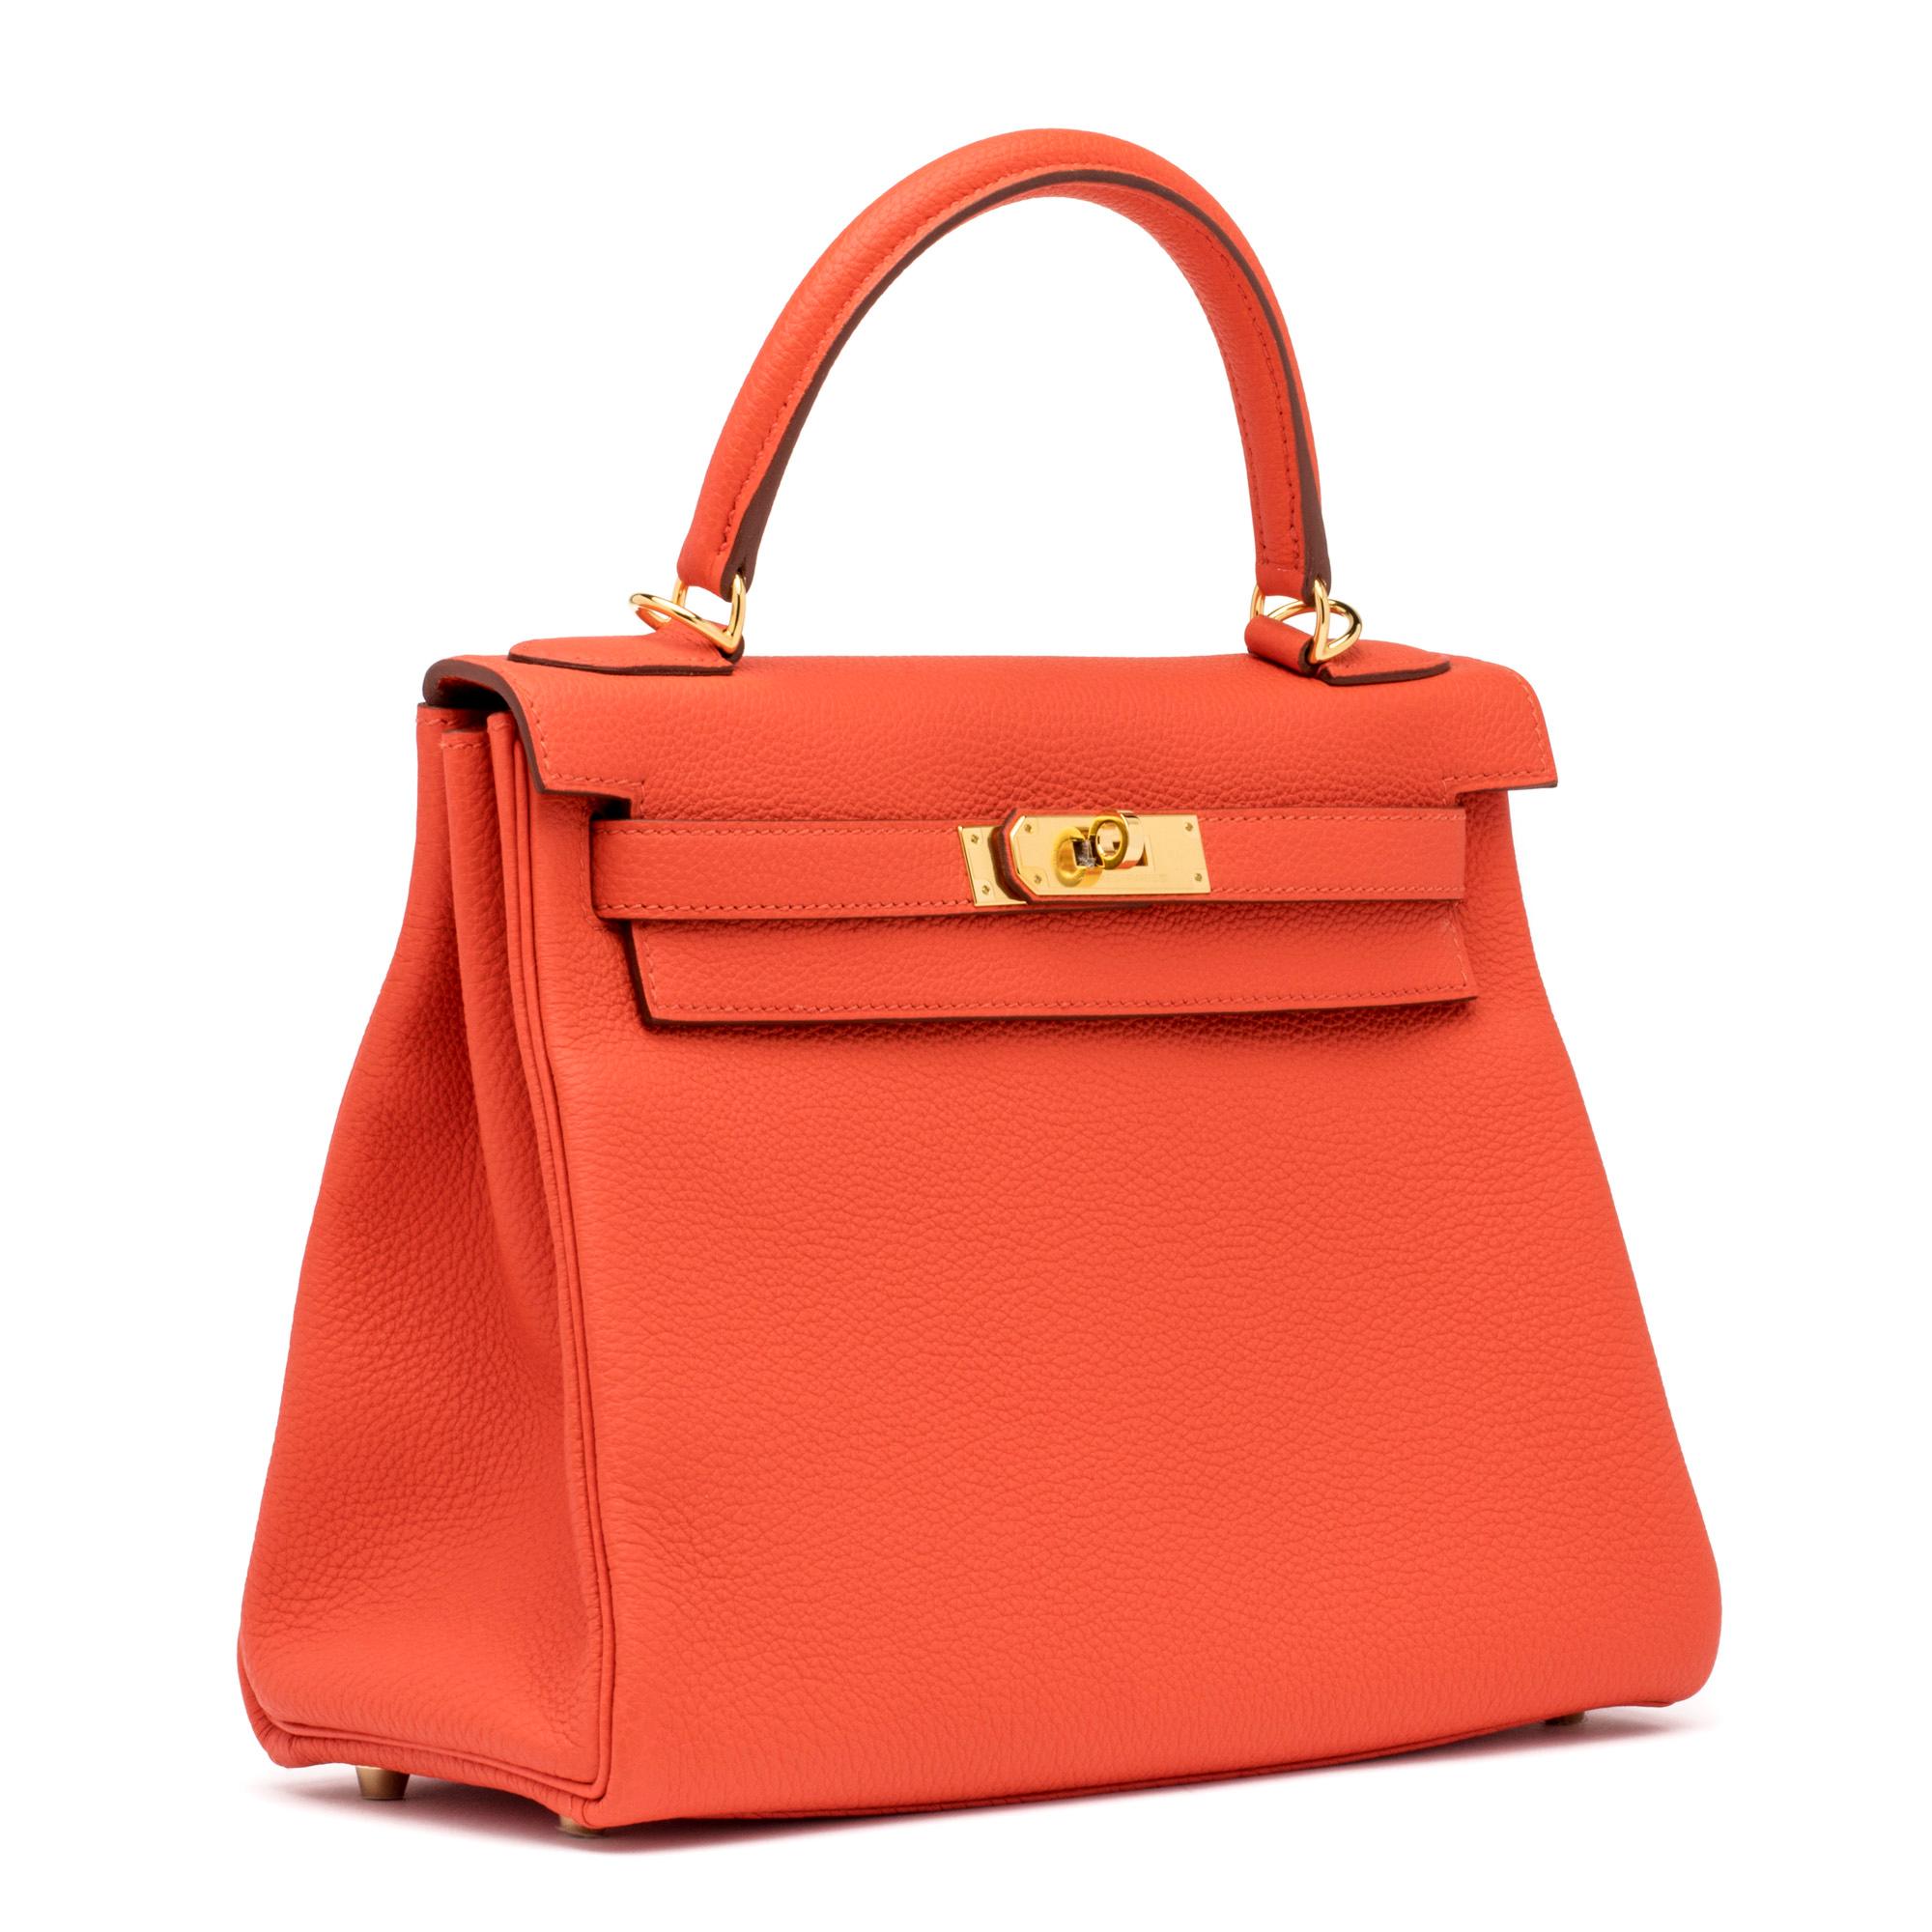 The Hermés Kelly bag embodies the quintessence of style and luxury due to its impeccable design, craftsmanship, and significance. That being said, it is the most iconic and desired piece from the Hermés handbag collection.